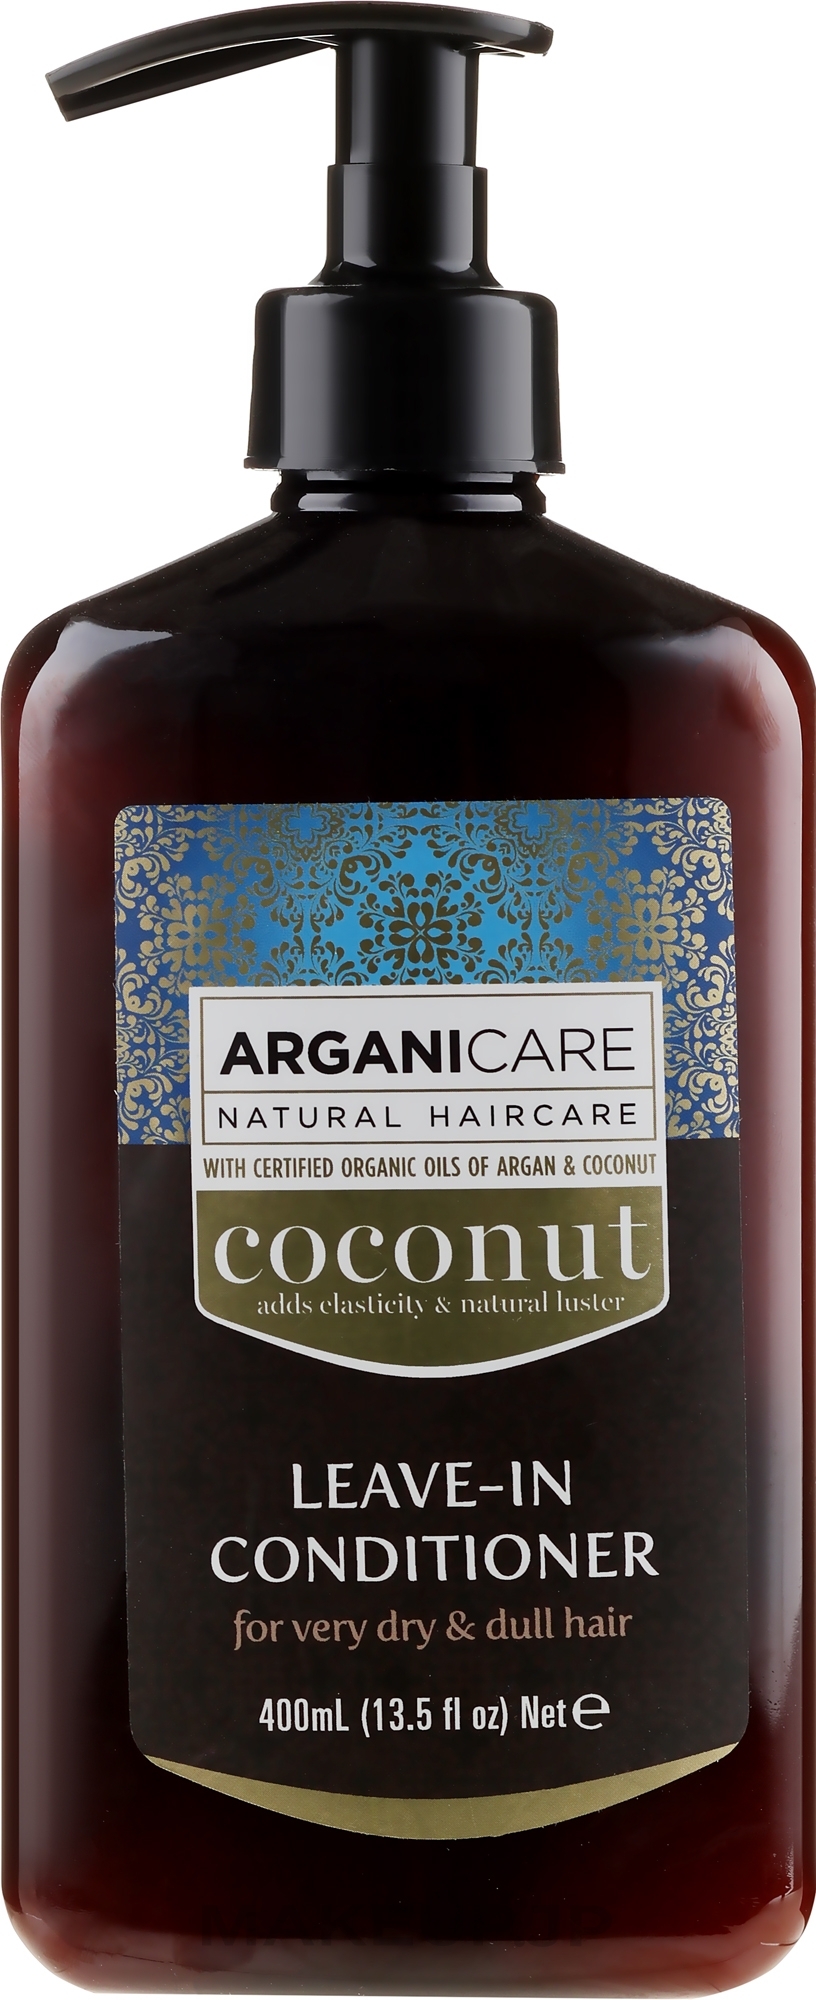 Leave-In Conditioner for Extra Dry and Dull Hair - Arganicare Coconut Leave-In Conditioner For Very Dry & Dull Hair — photo 400 ml